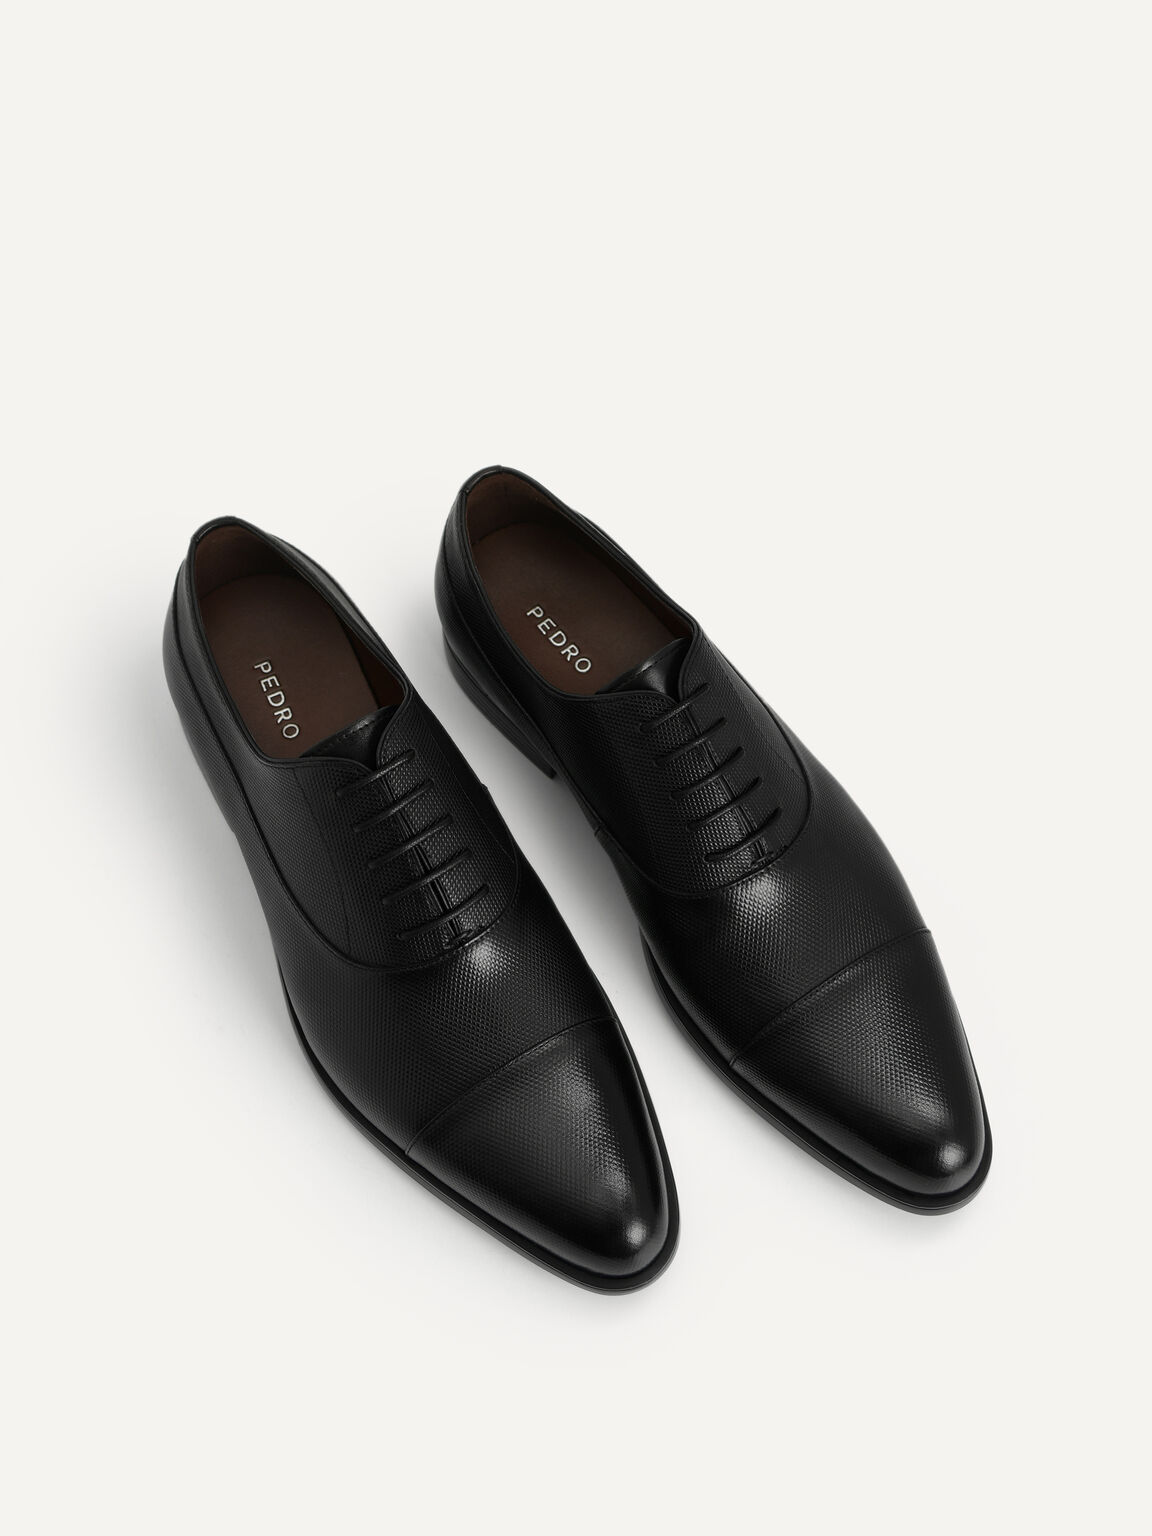 Textured Leather Cap Toe Derby Shoes, Black